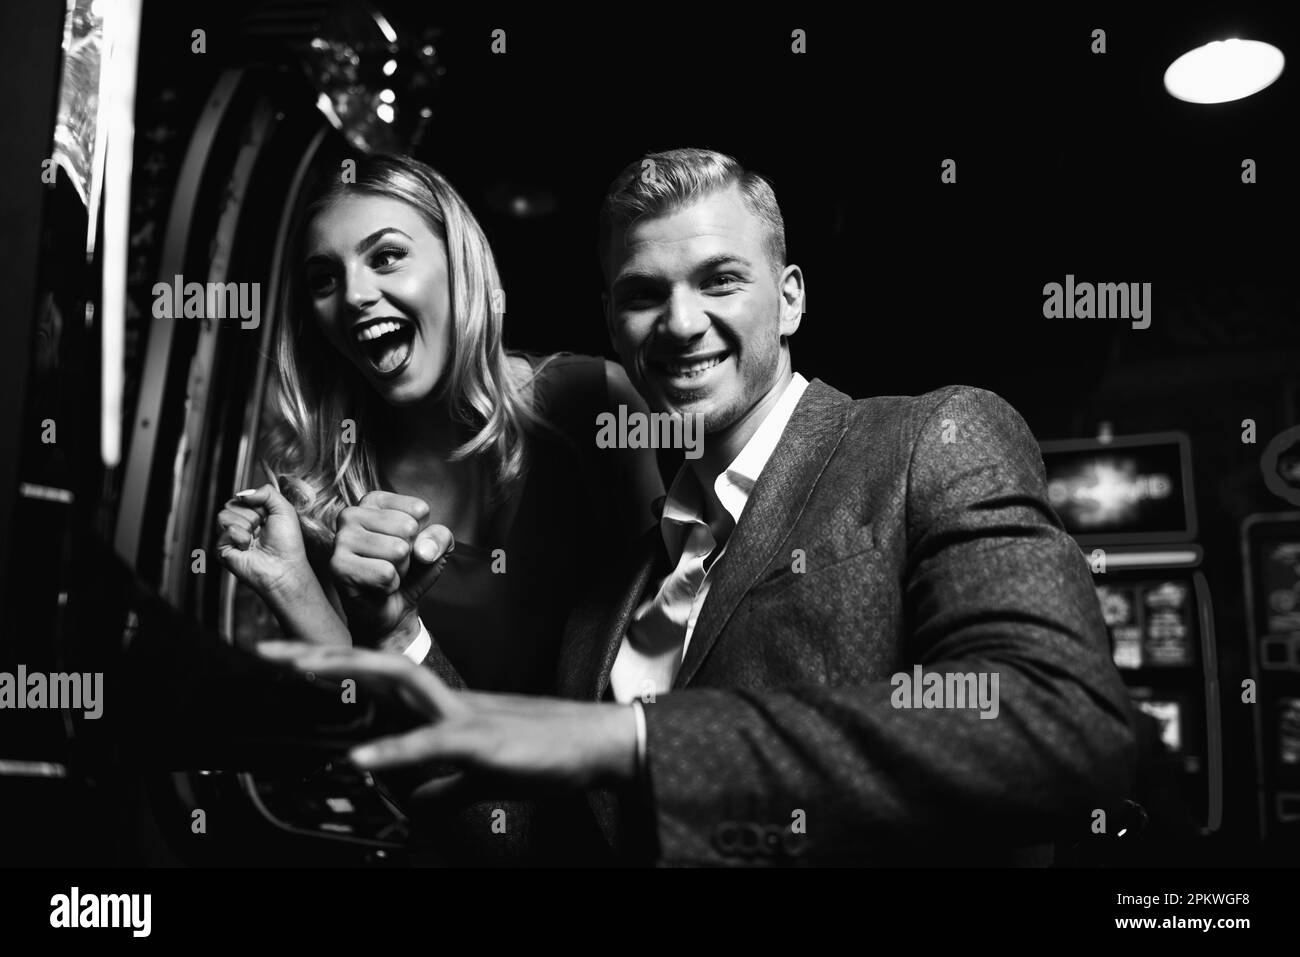 Young Group of People at the Automat Machine in a Casino and Celebrate Stock Photo